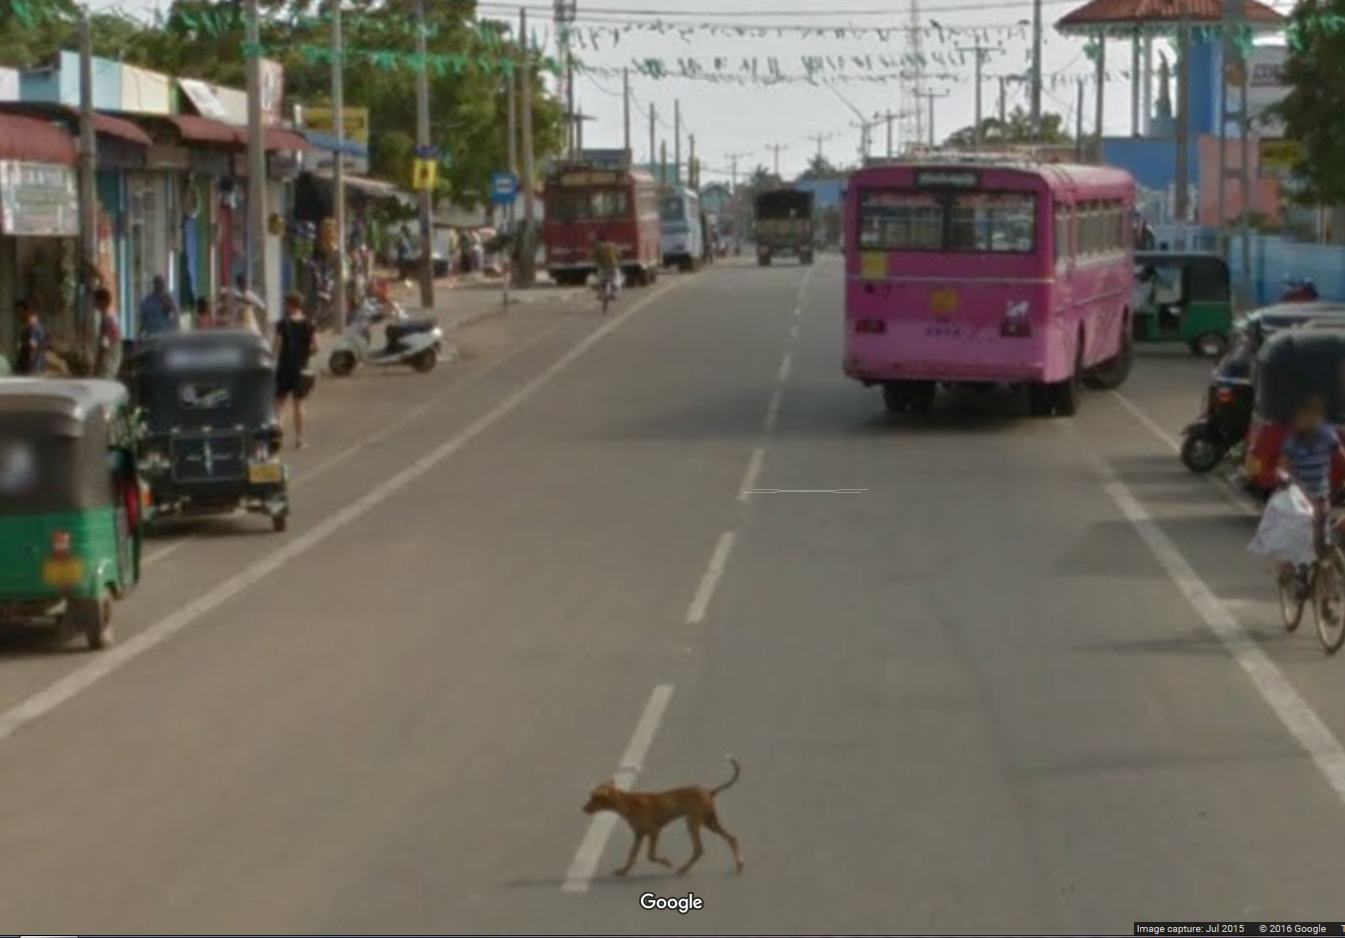 Why did the dog cross the road?